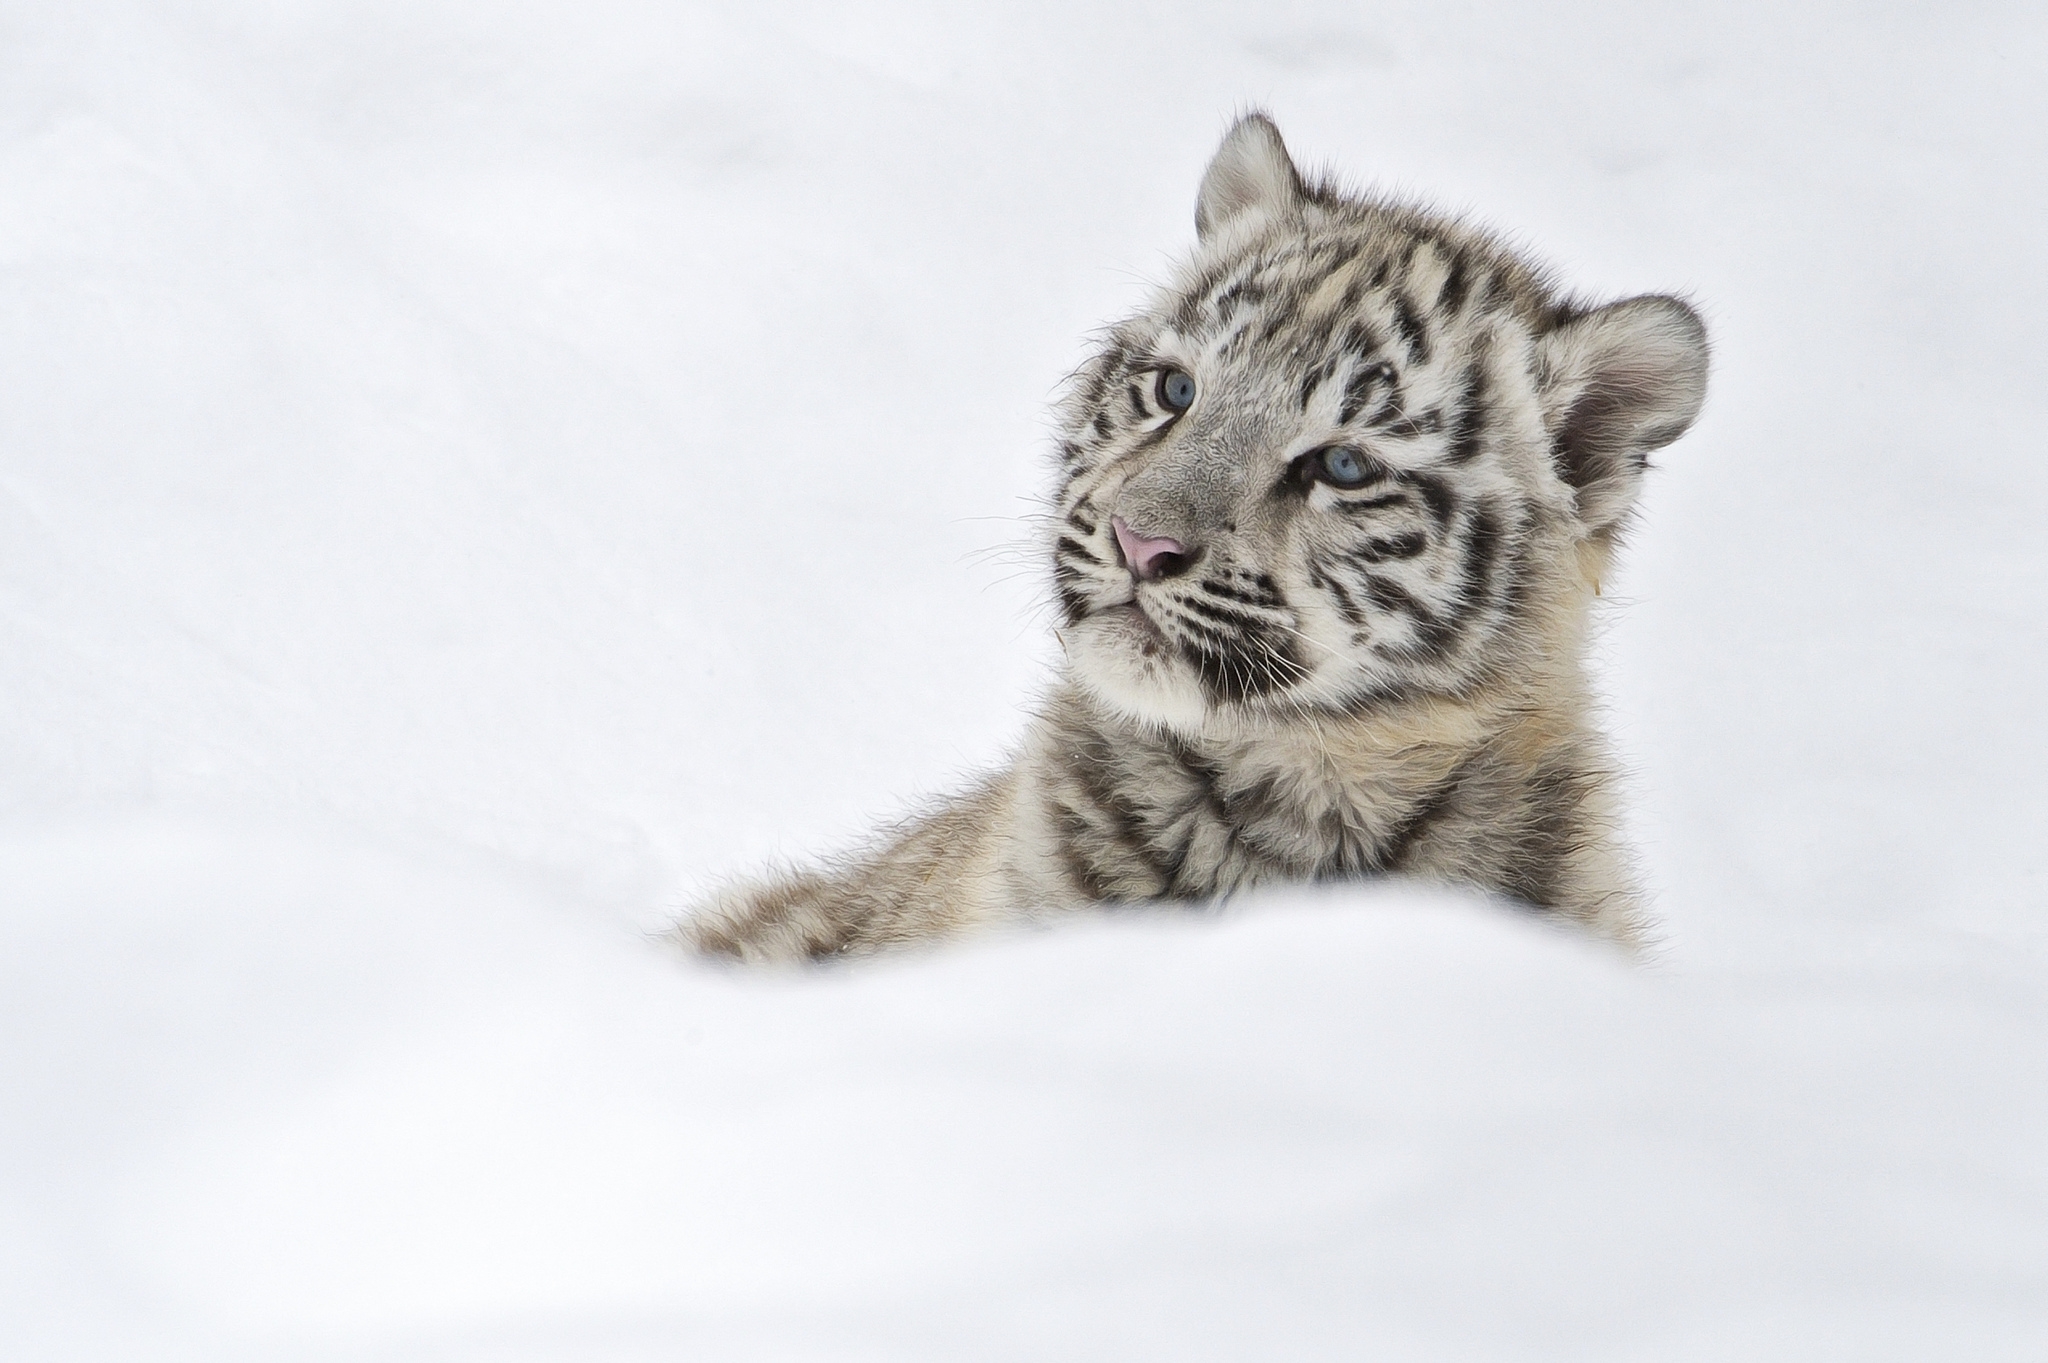 Tigers Baby in Snow Wallpaper